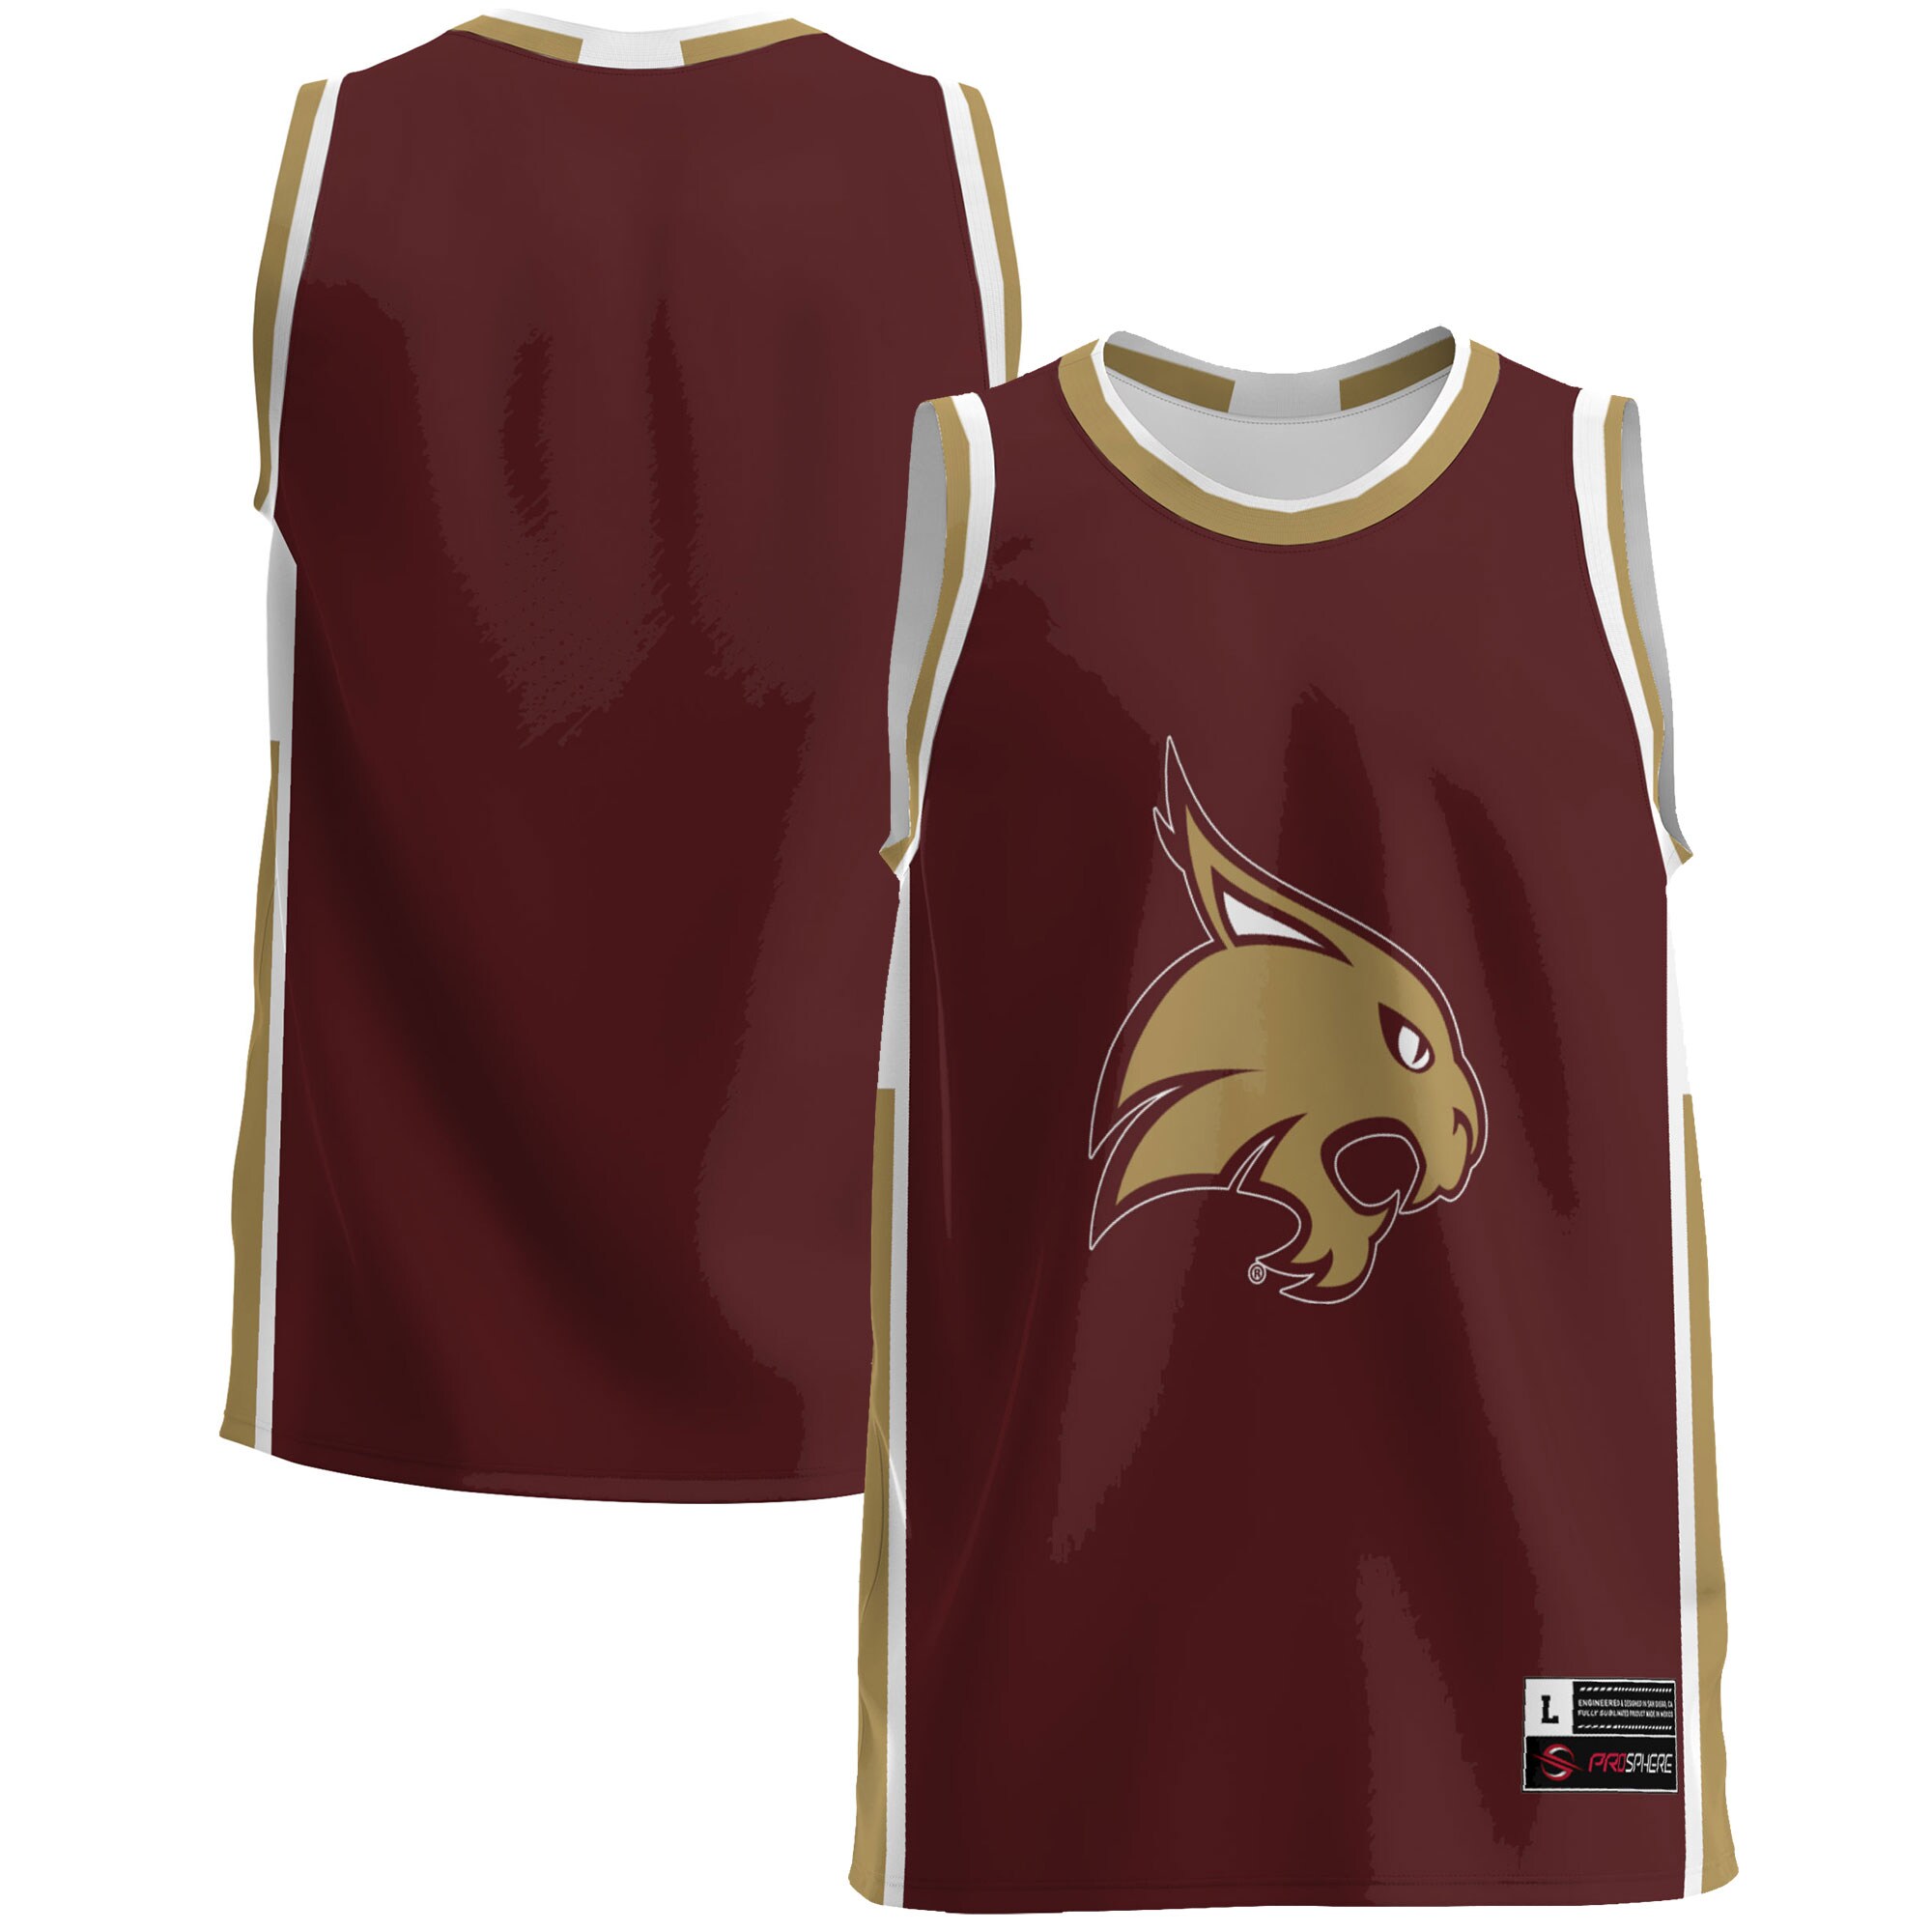 Texas State Bobcats Basketball Jersey - Maroon For Youth Women Men